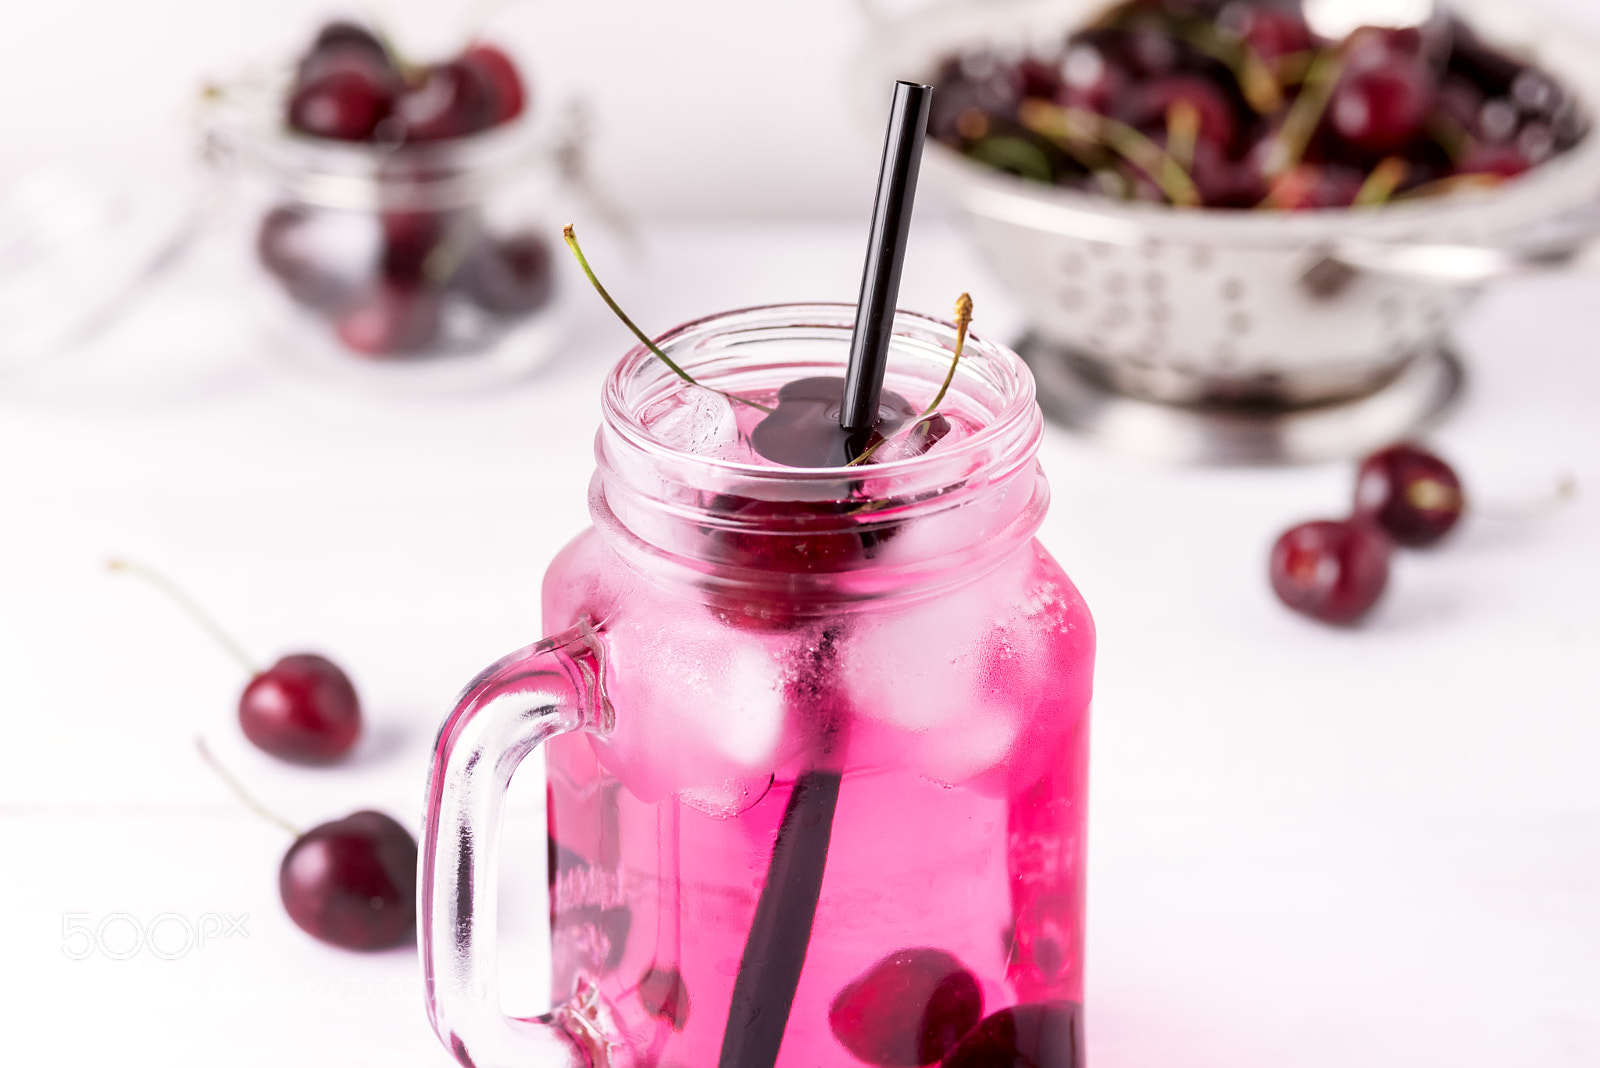 Nikon D750 sample photo. Cold drink with cherry photography